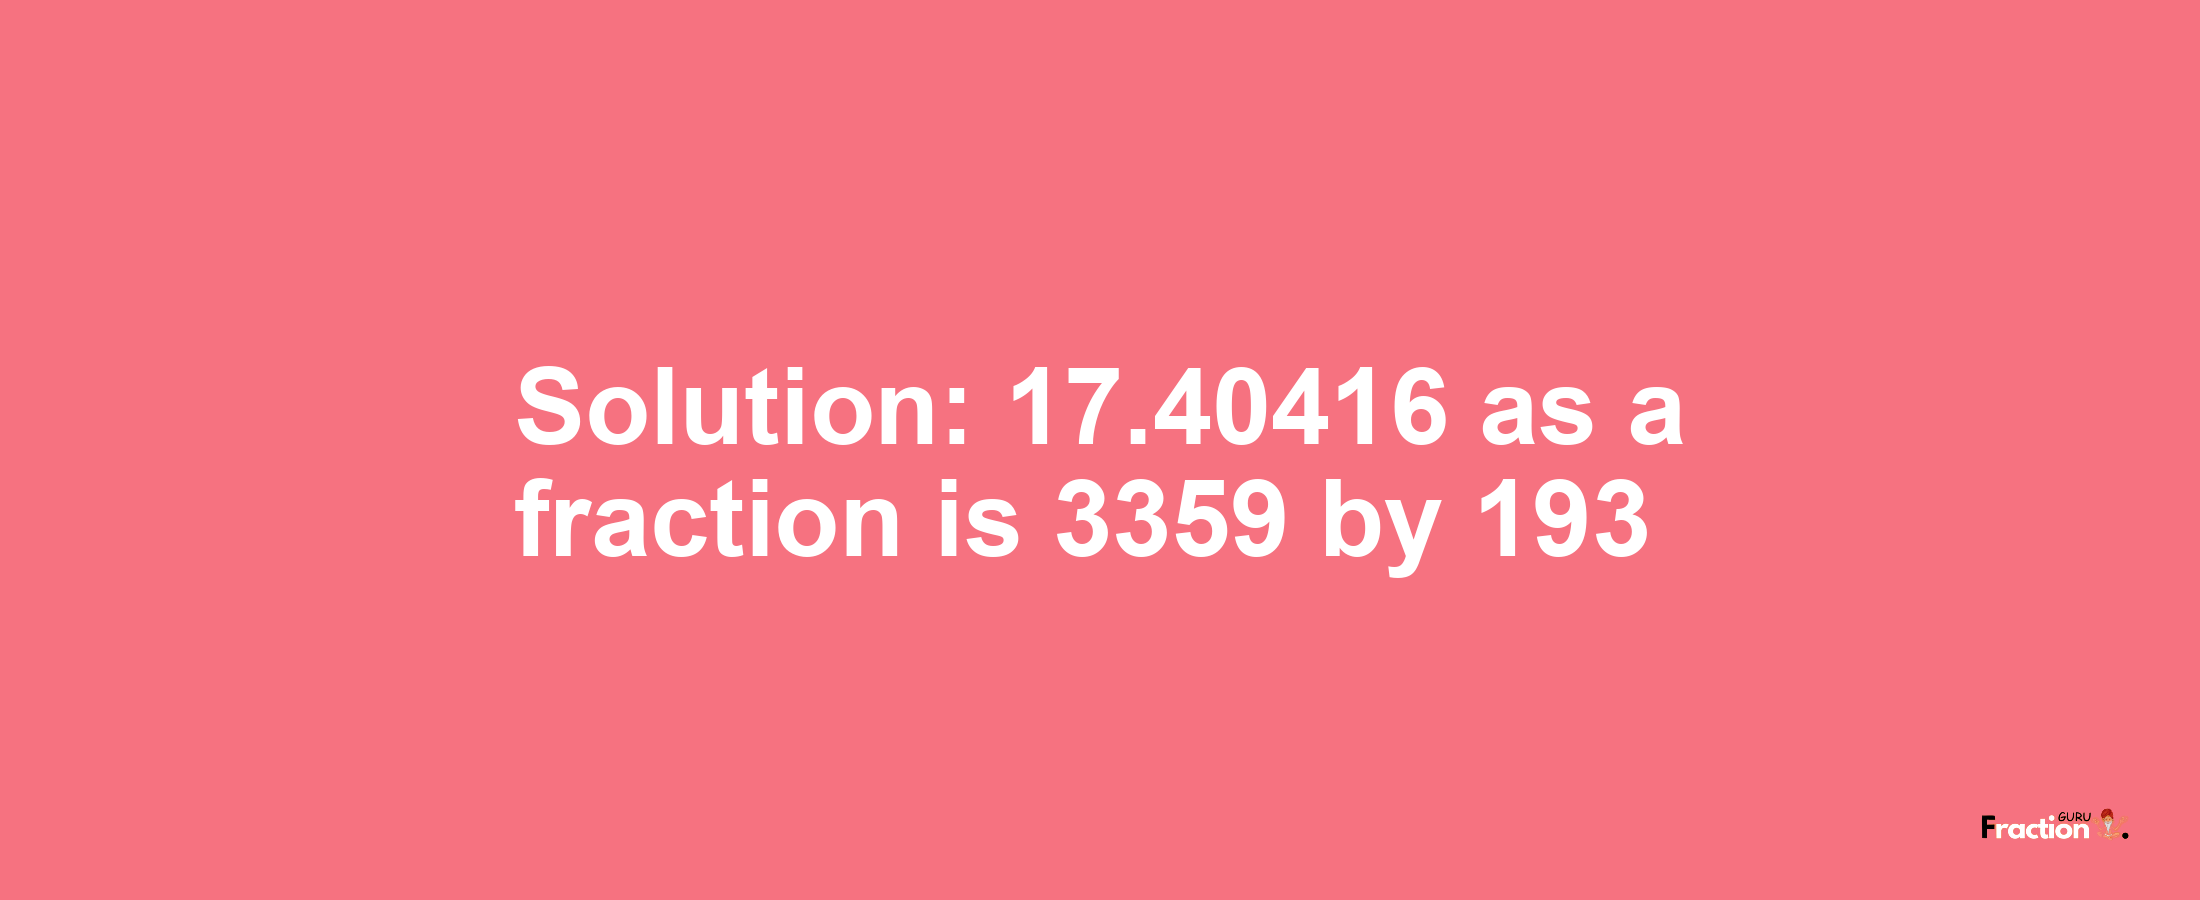 Solution:17.40416 as a fraction is 3359/193